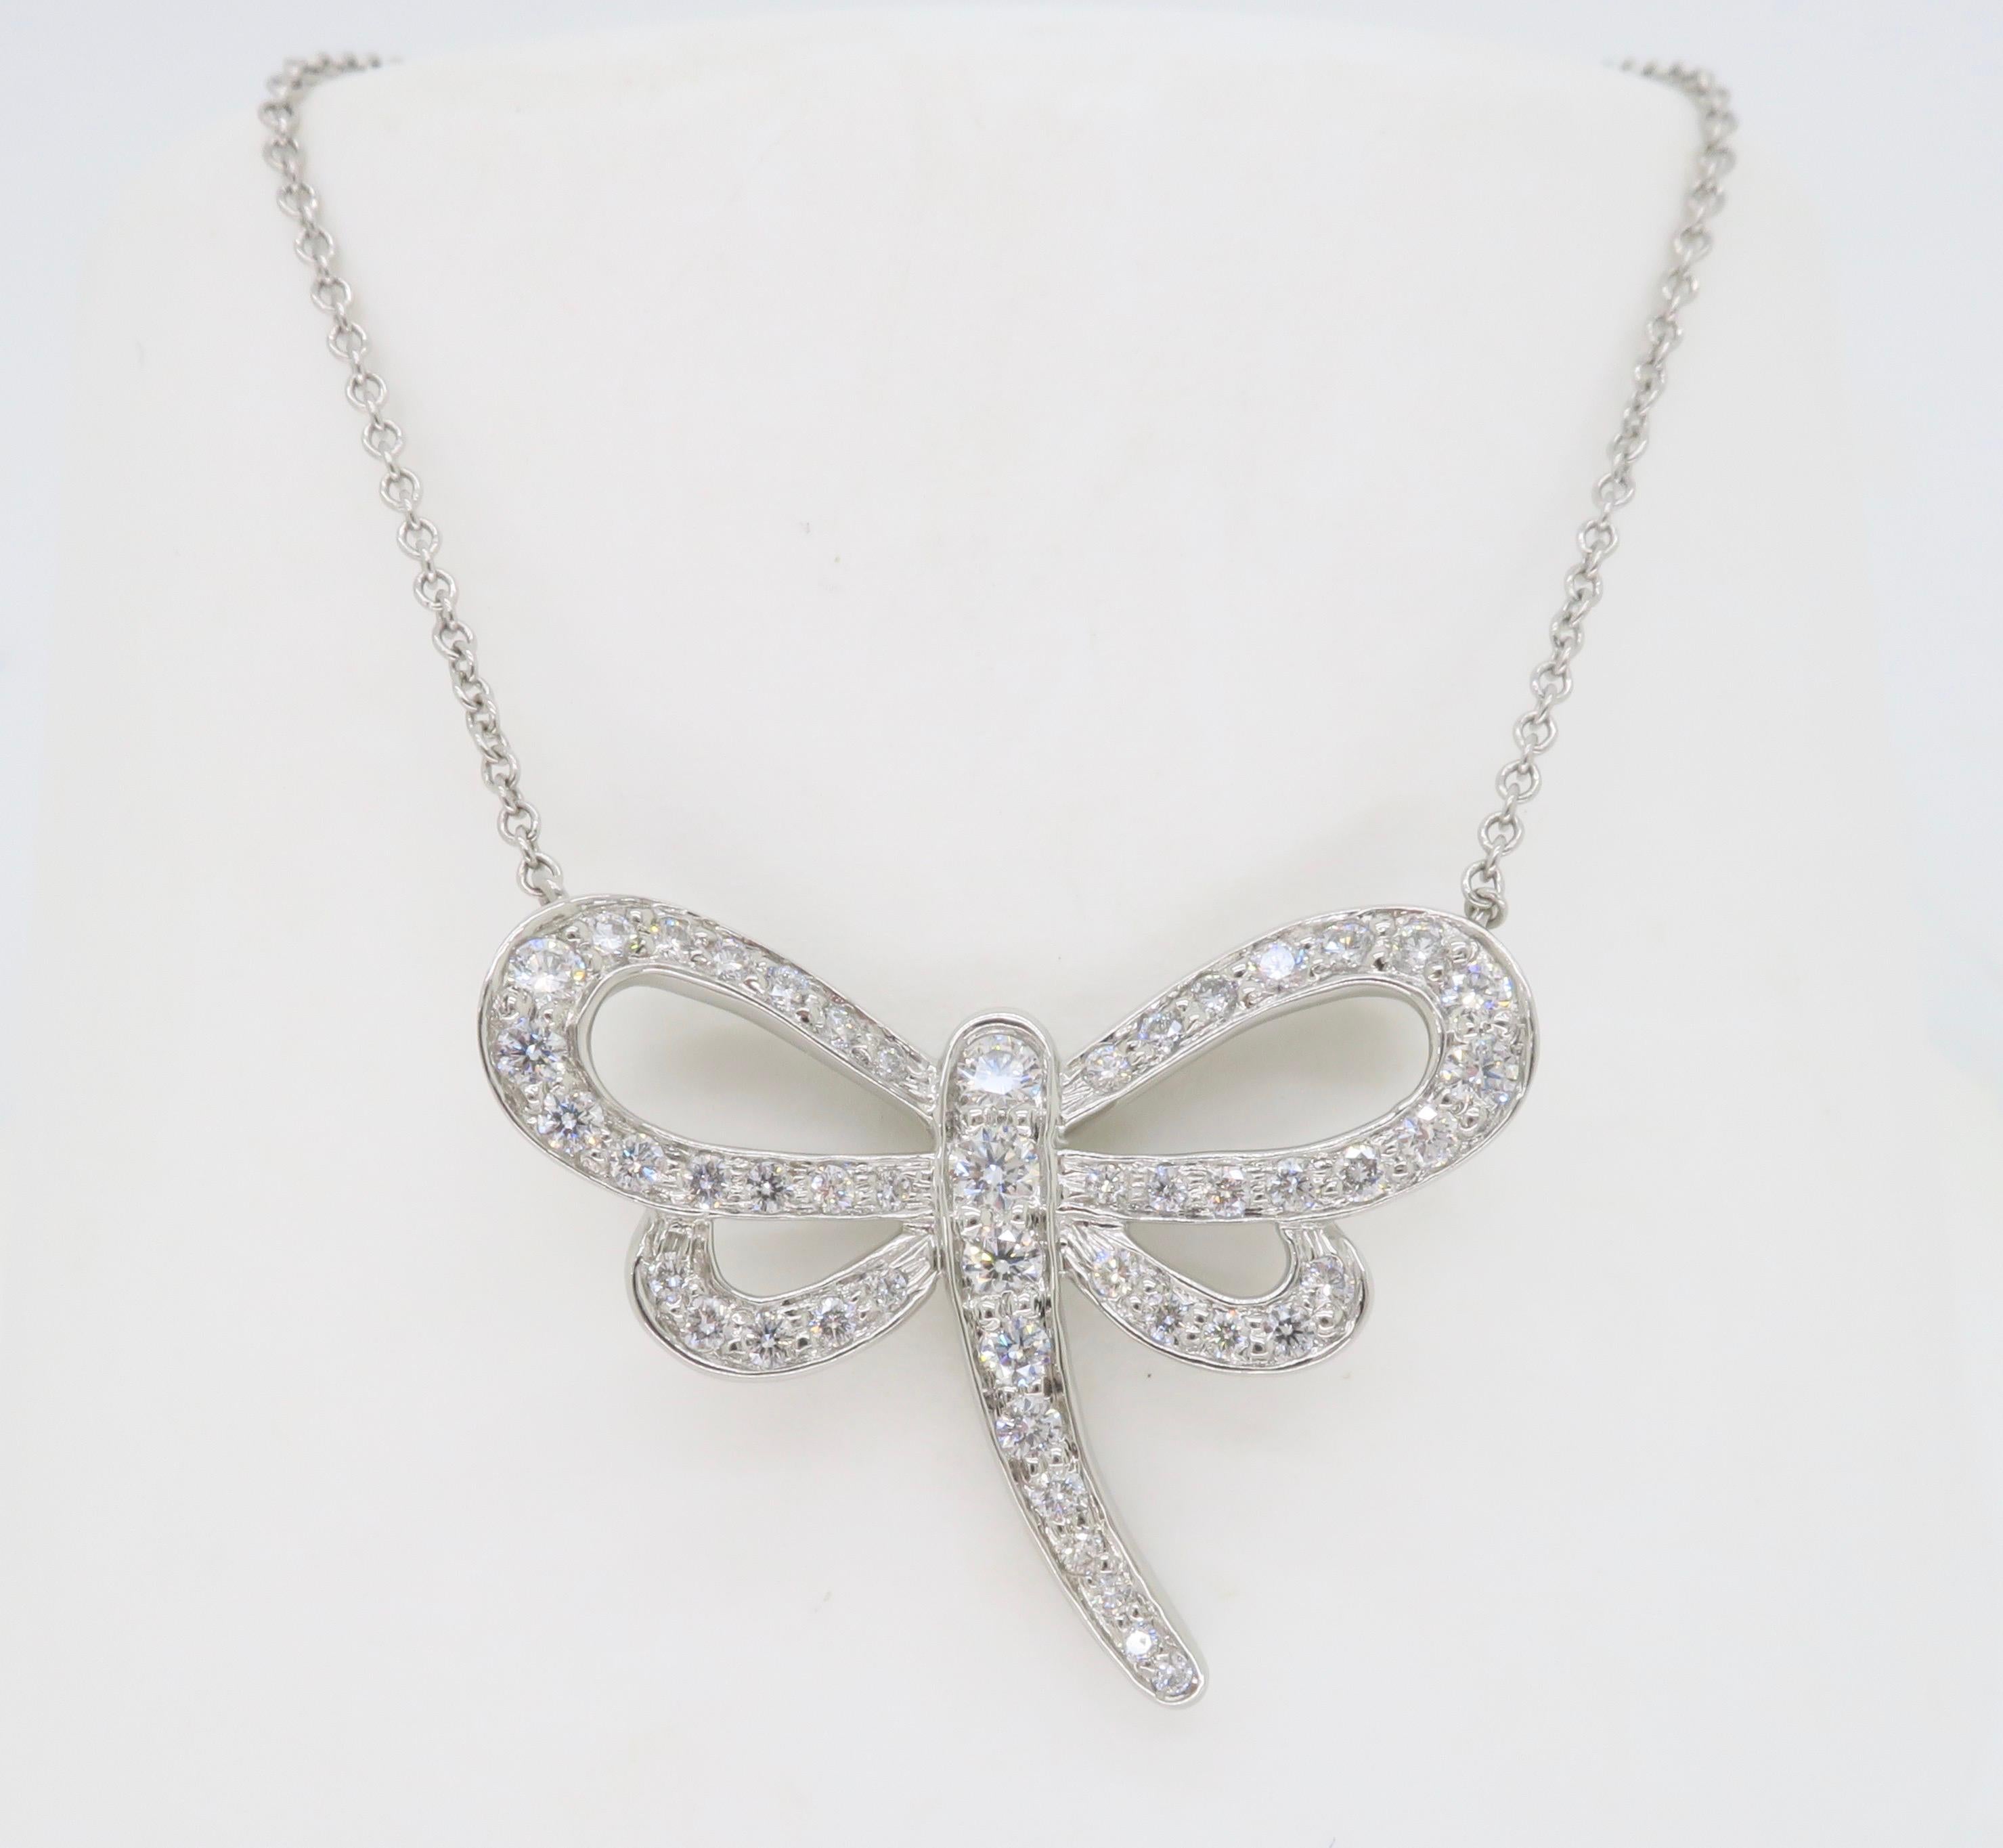 Rare Tiffany & Co. Diamond Dragonfly Necklace made in Platinum  2